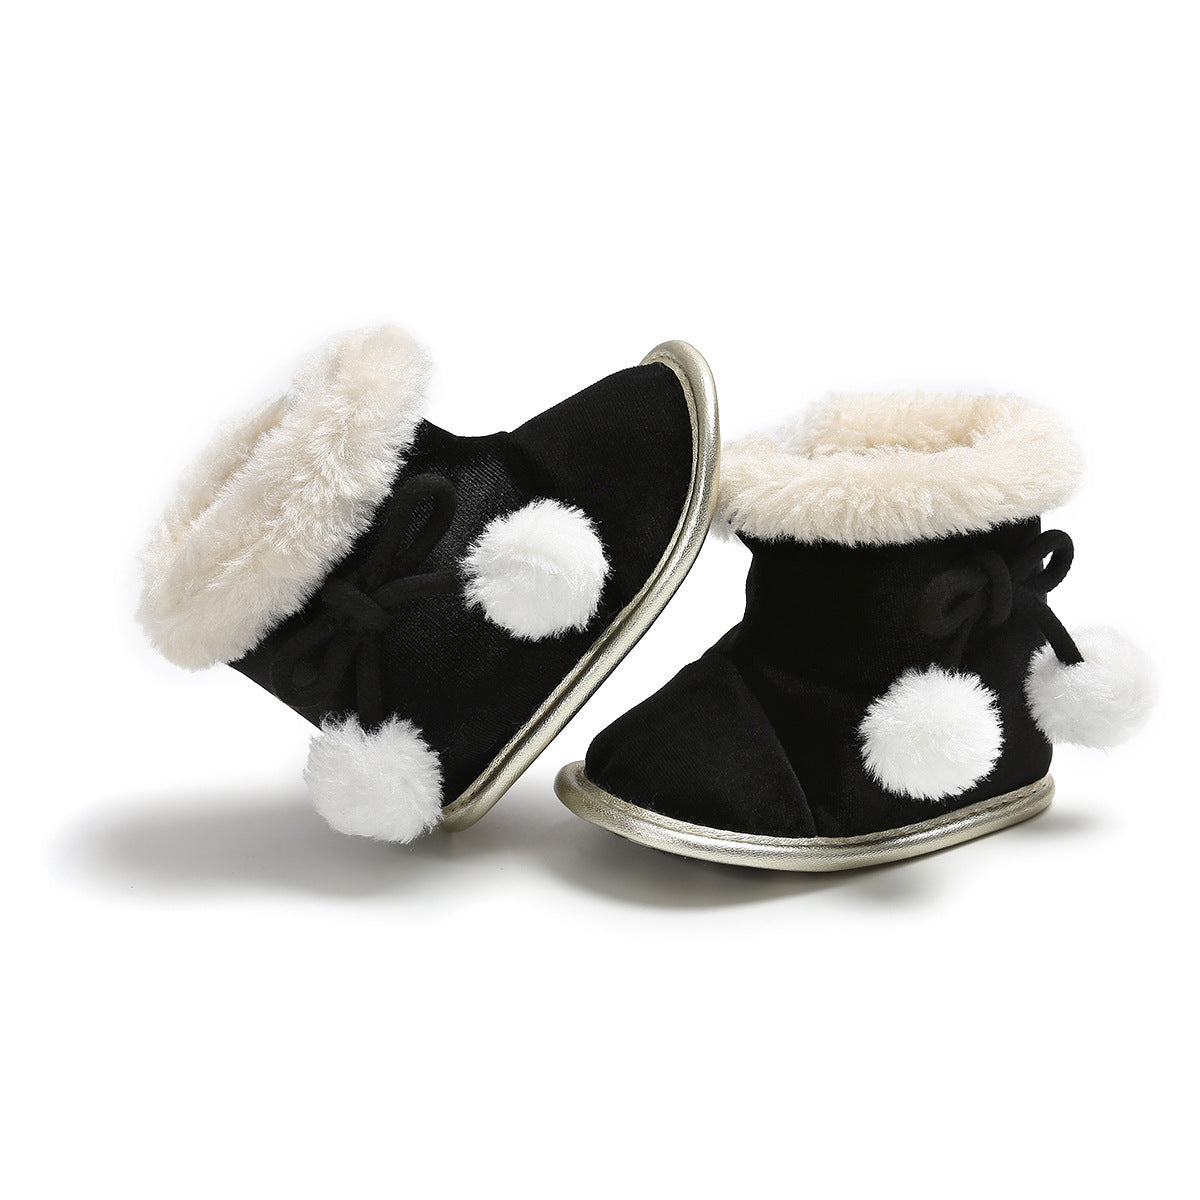 Kids Baby Girls Winter Boots Footwear Soft Sole Shoes For 0-1 Years